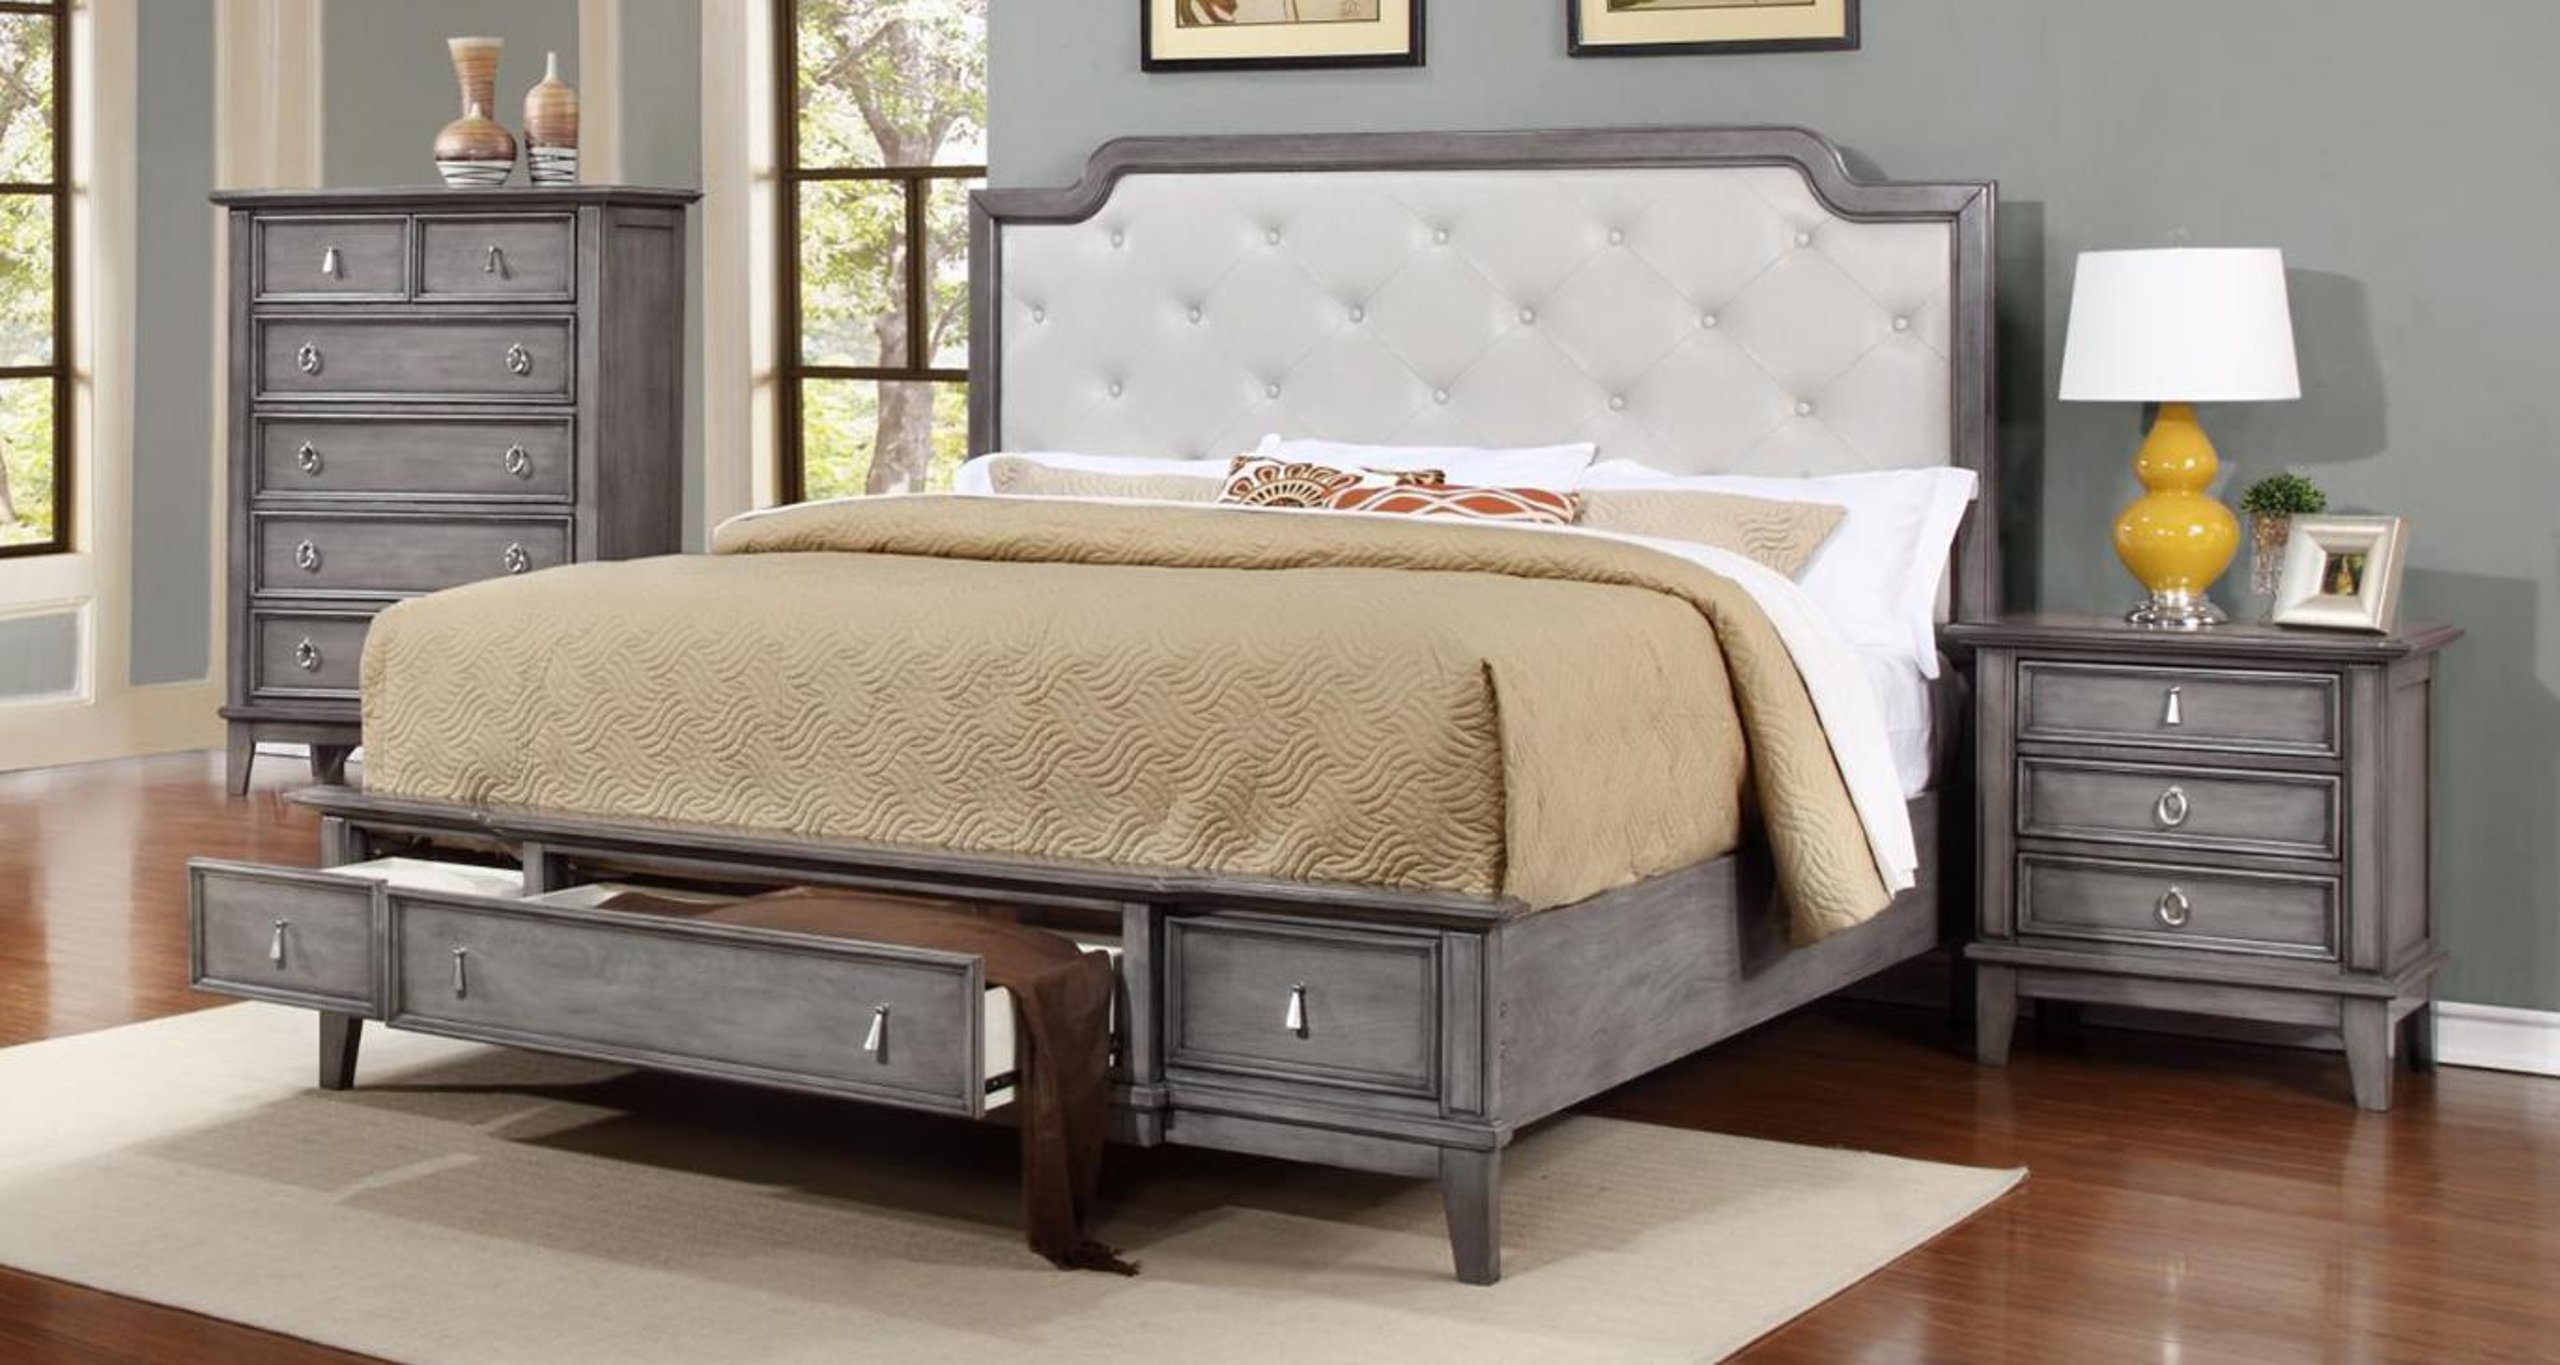 Myco Furniture Louis Philippe Bed-Color:Cherry,Size:King 